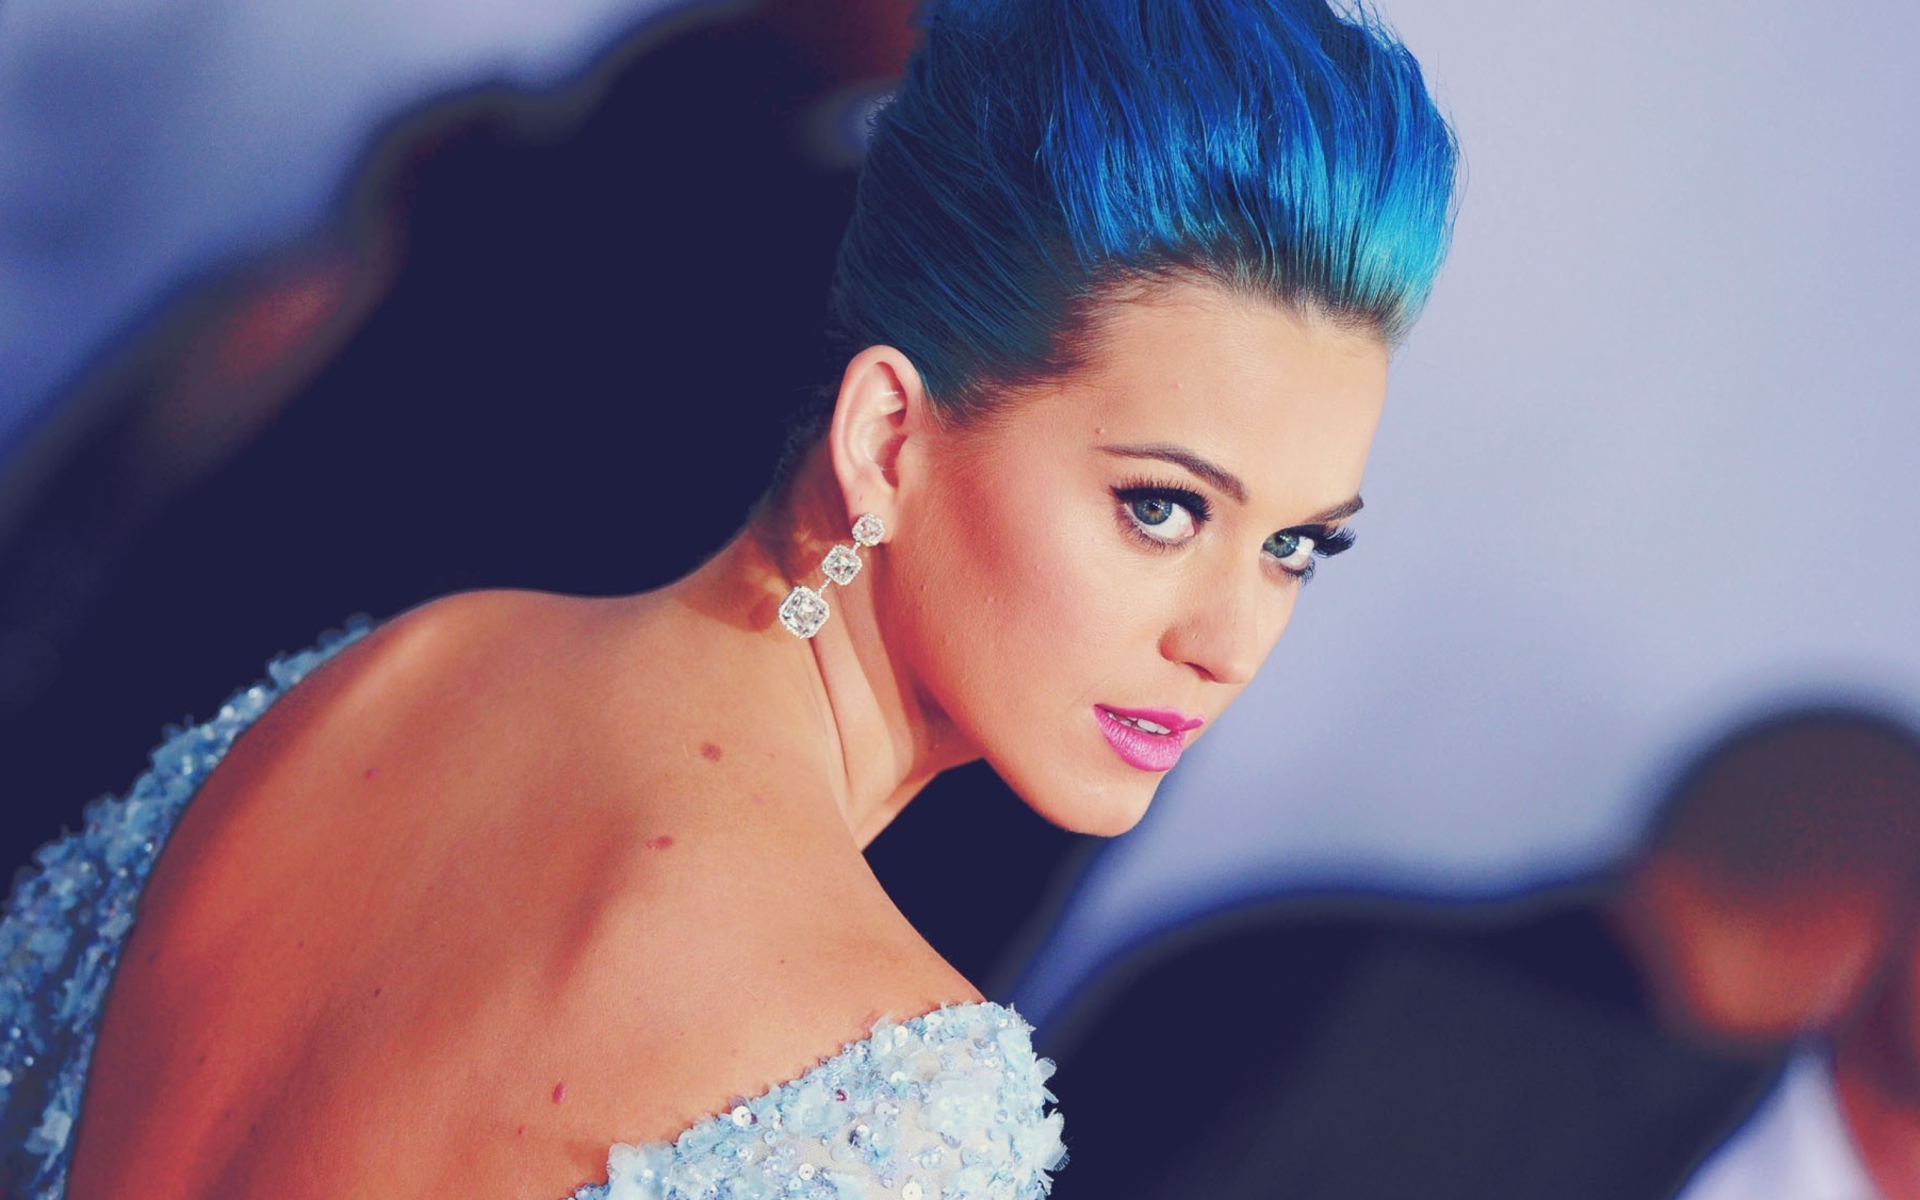 8. Katy Perry's blue hair and candy dress fashion evolution - wide 5